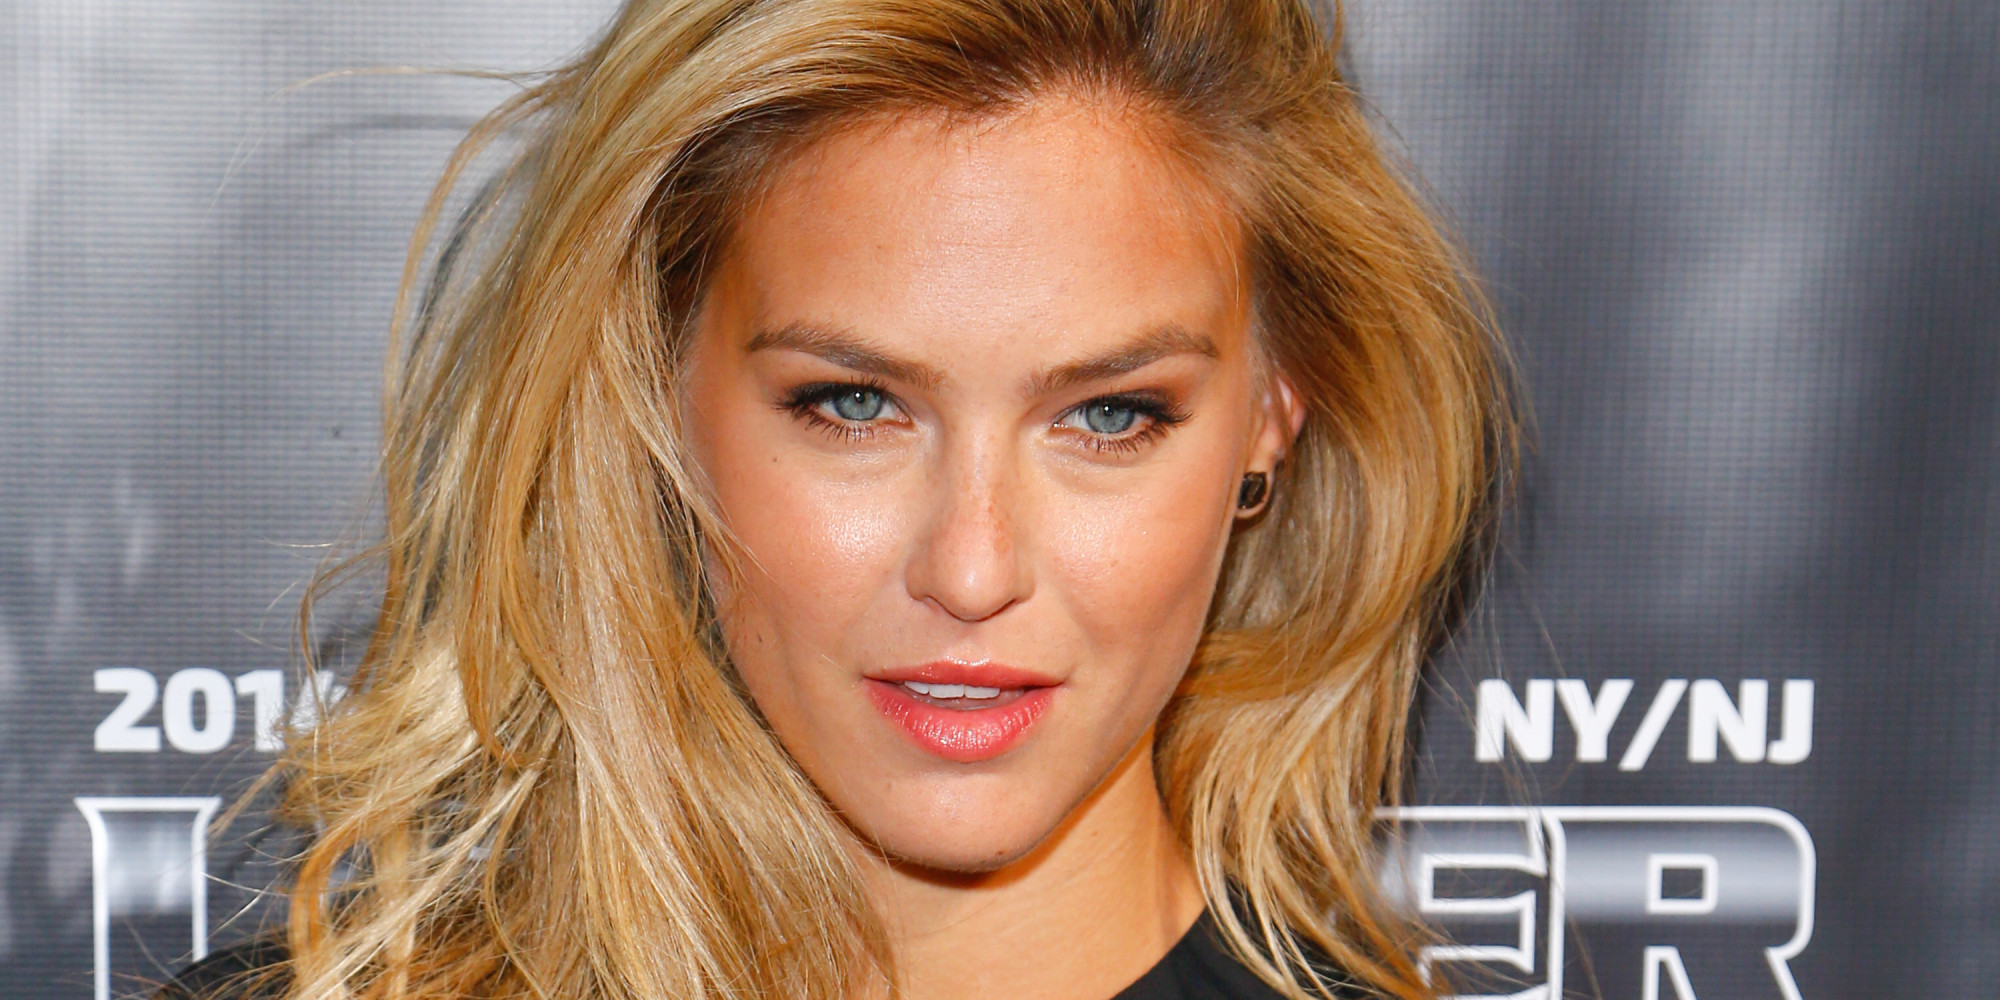 NEW YORK, NY - JANUARY 31:  Model Bar Refaeli attends the 11th Annual "Leather & Laces" Party at The Liberty Theatre on January 31, 2014 in New York City.  (Photo by Charles Norfleet/FilmMagic)